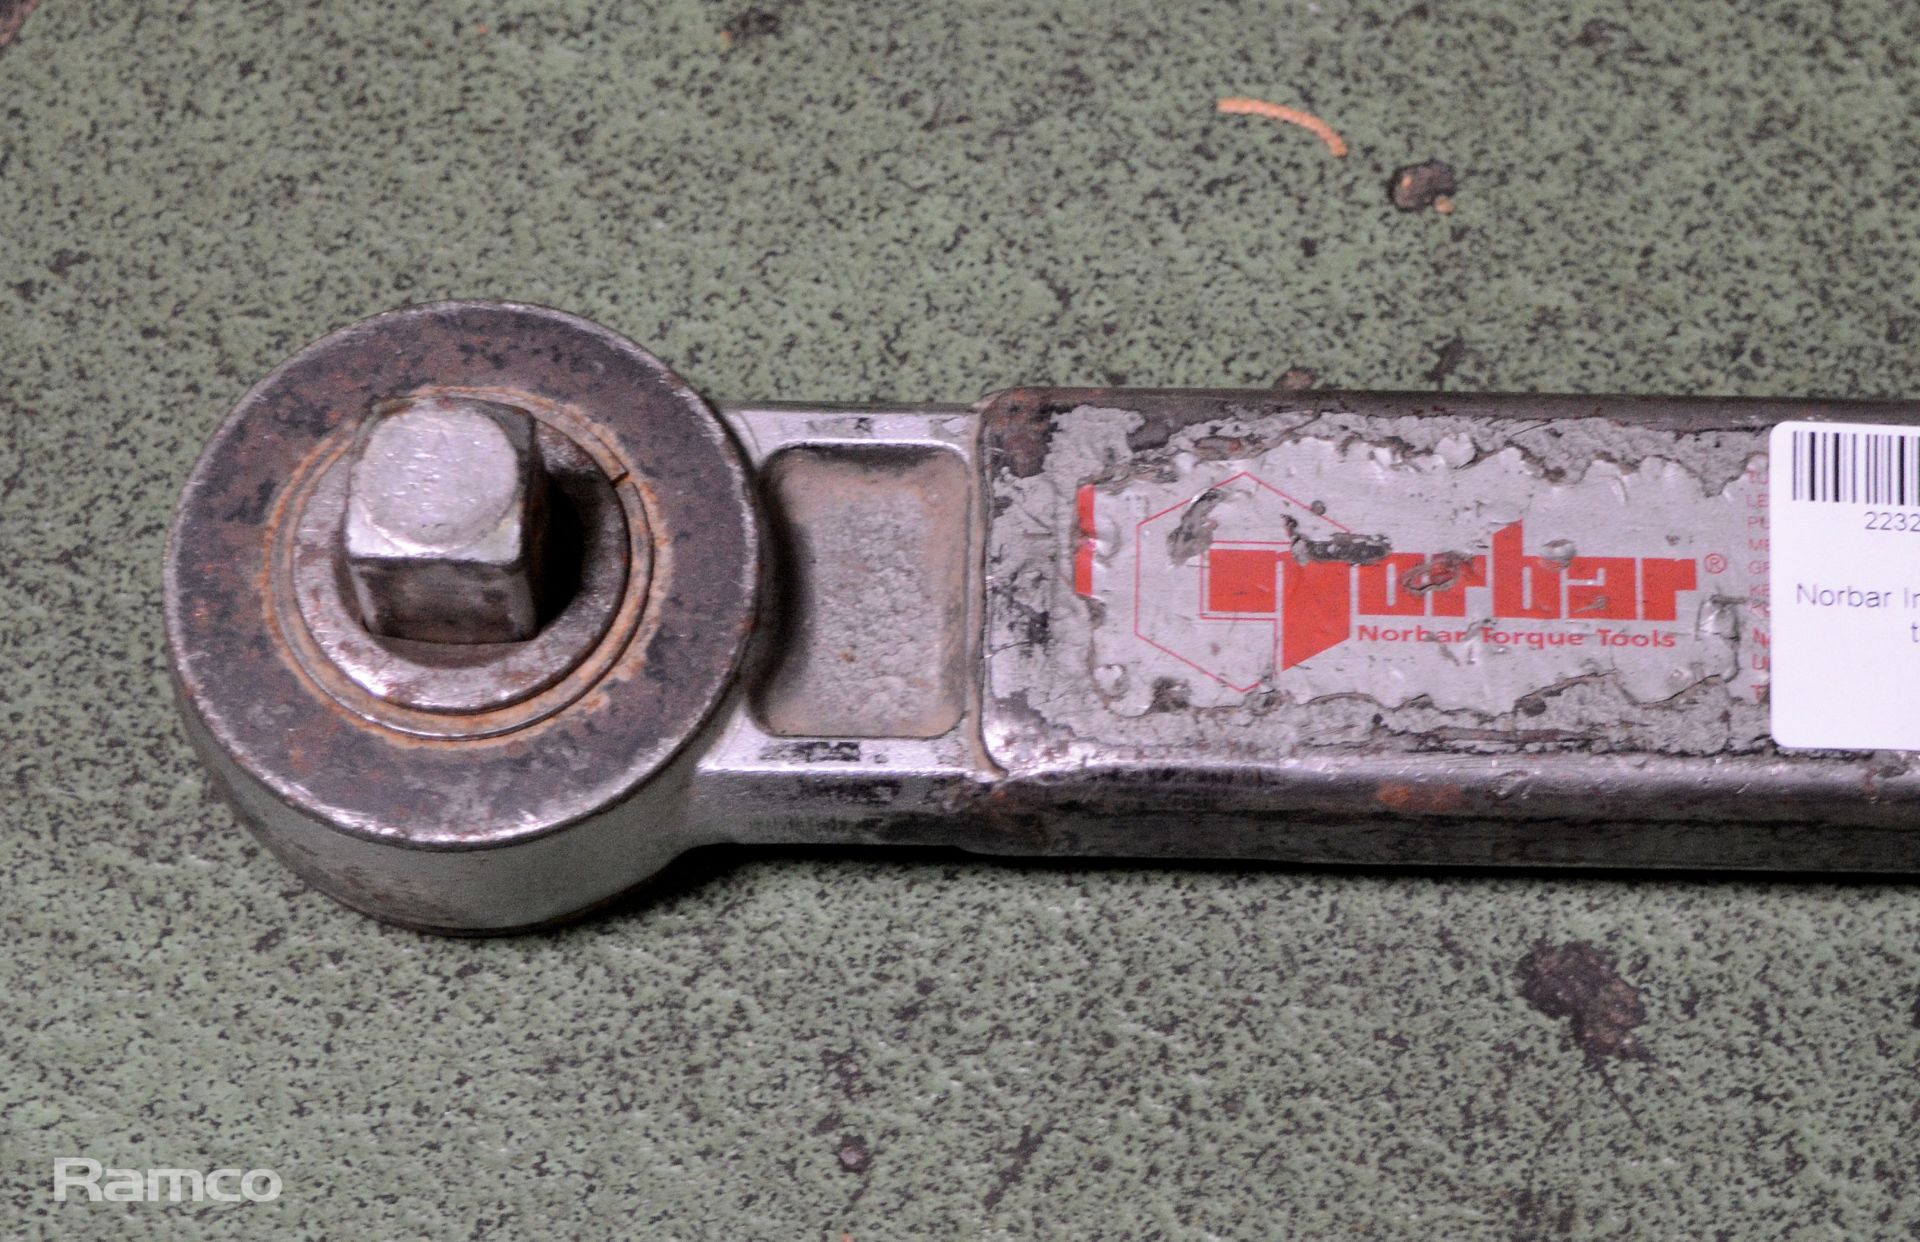 Norbar Industrial 4R, 3/4" torque wrench - Image 2 of 3